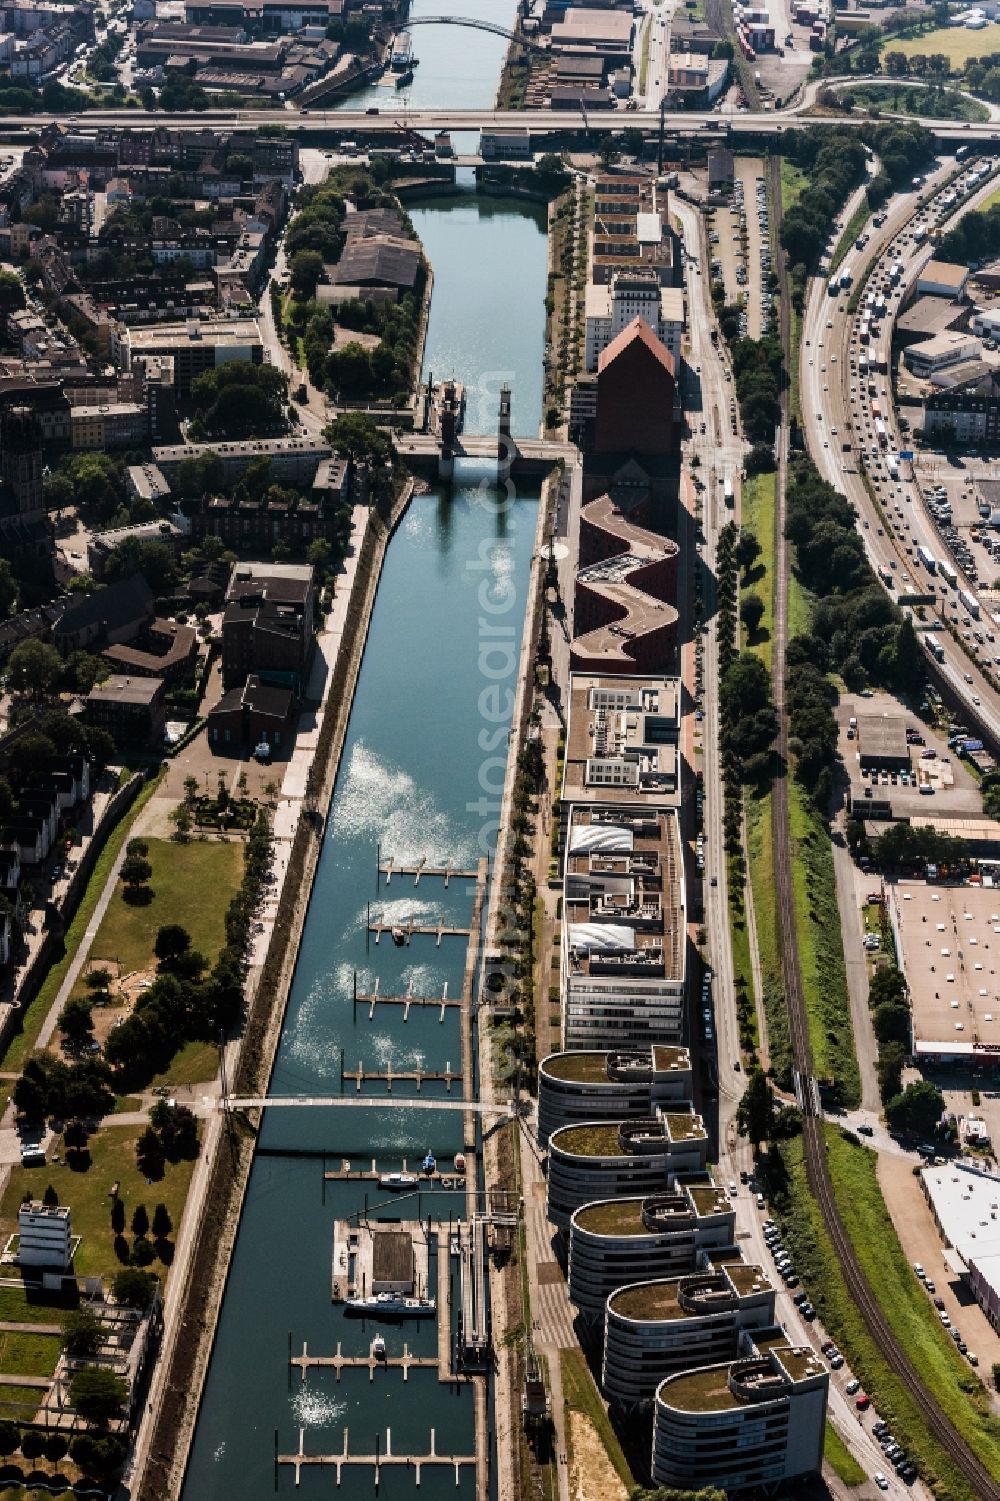 Aerial image Duisburg - Inner harbour docks and pool Holzhafen in Duisburg in the state of North Rhine-Westphalia